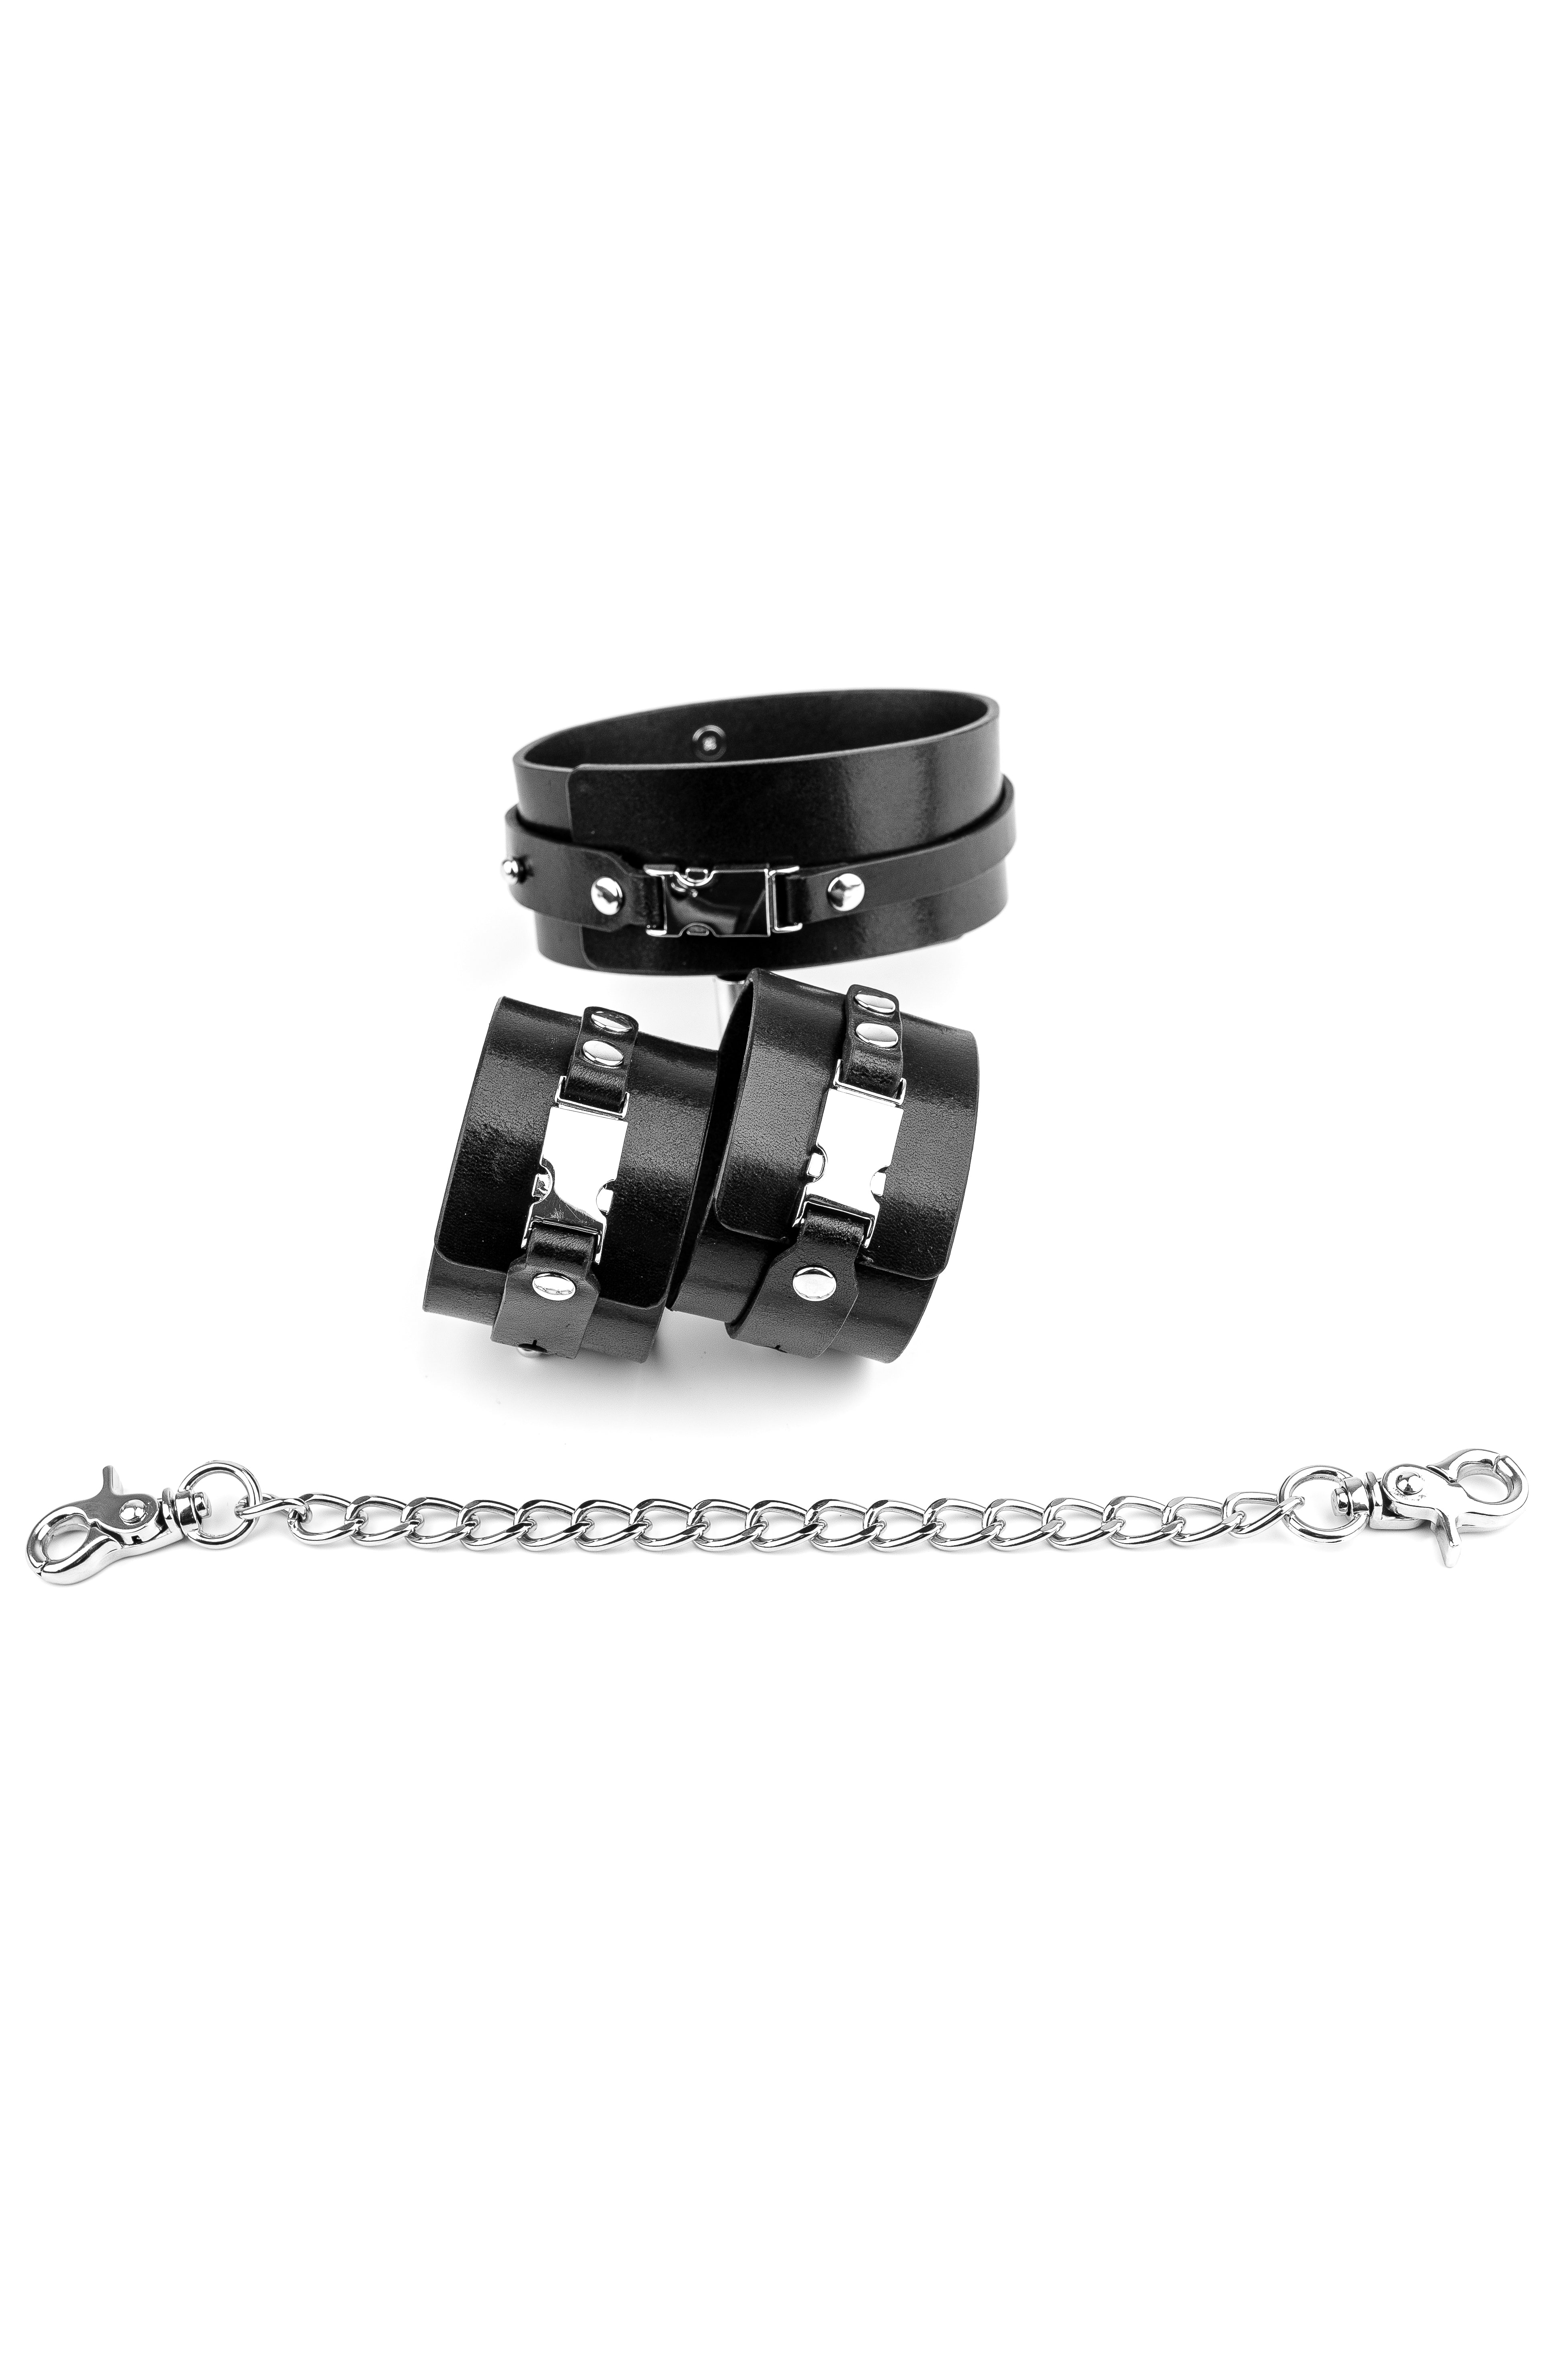 “Fast X me up” Cuffs and Collar Set with chain connector